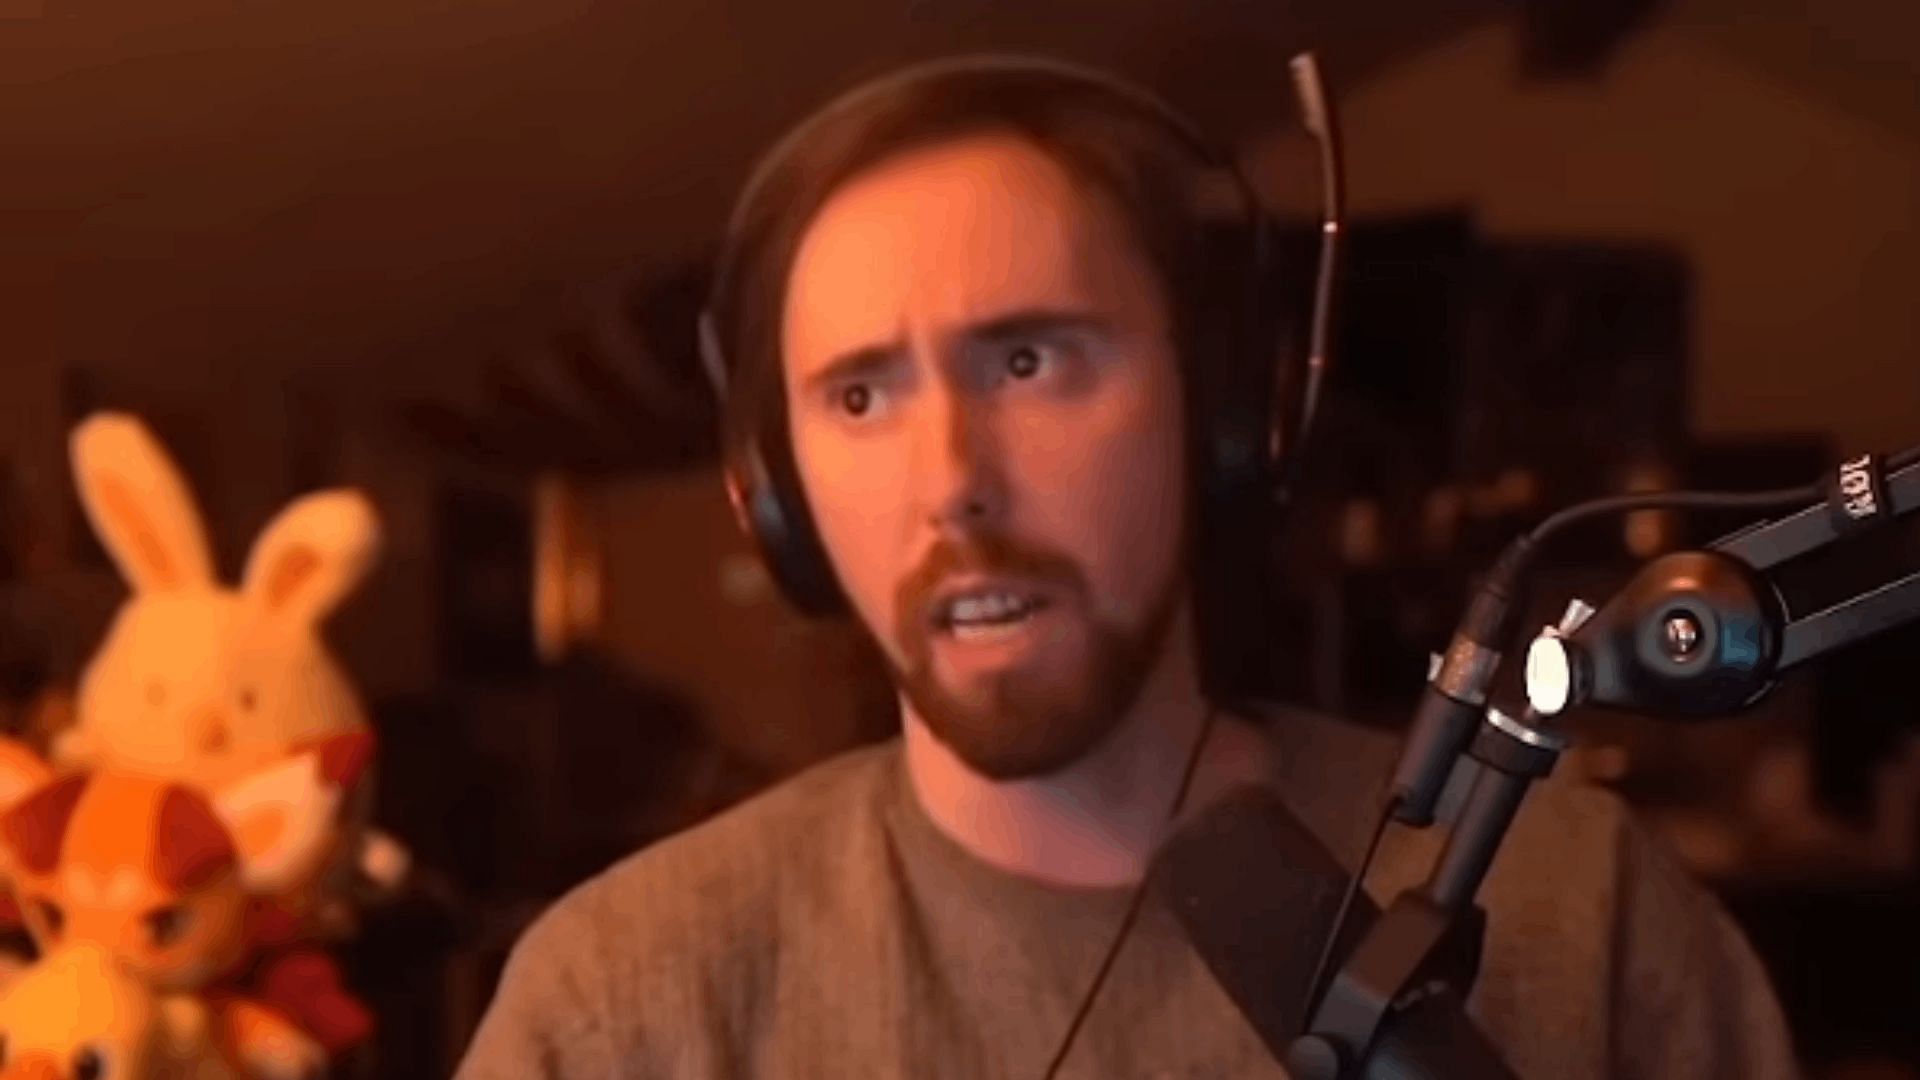 Asmongold reacted to comments by the former Blizzard developer (Image via Asmongold Clips/YouTube)